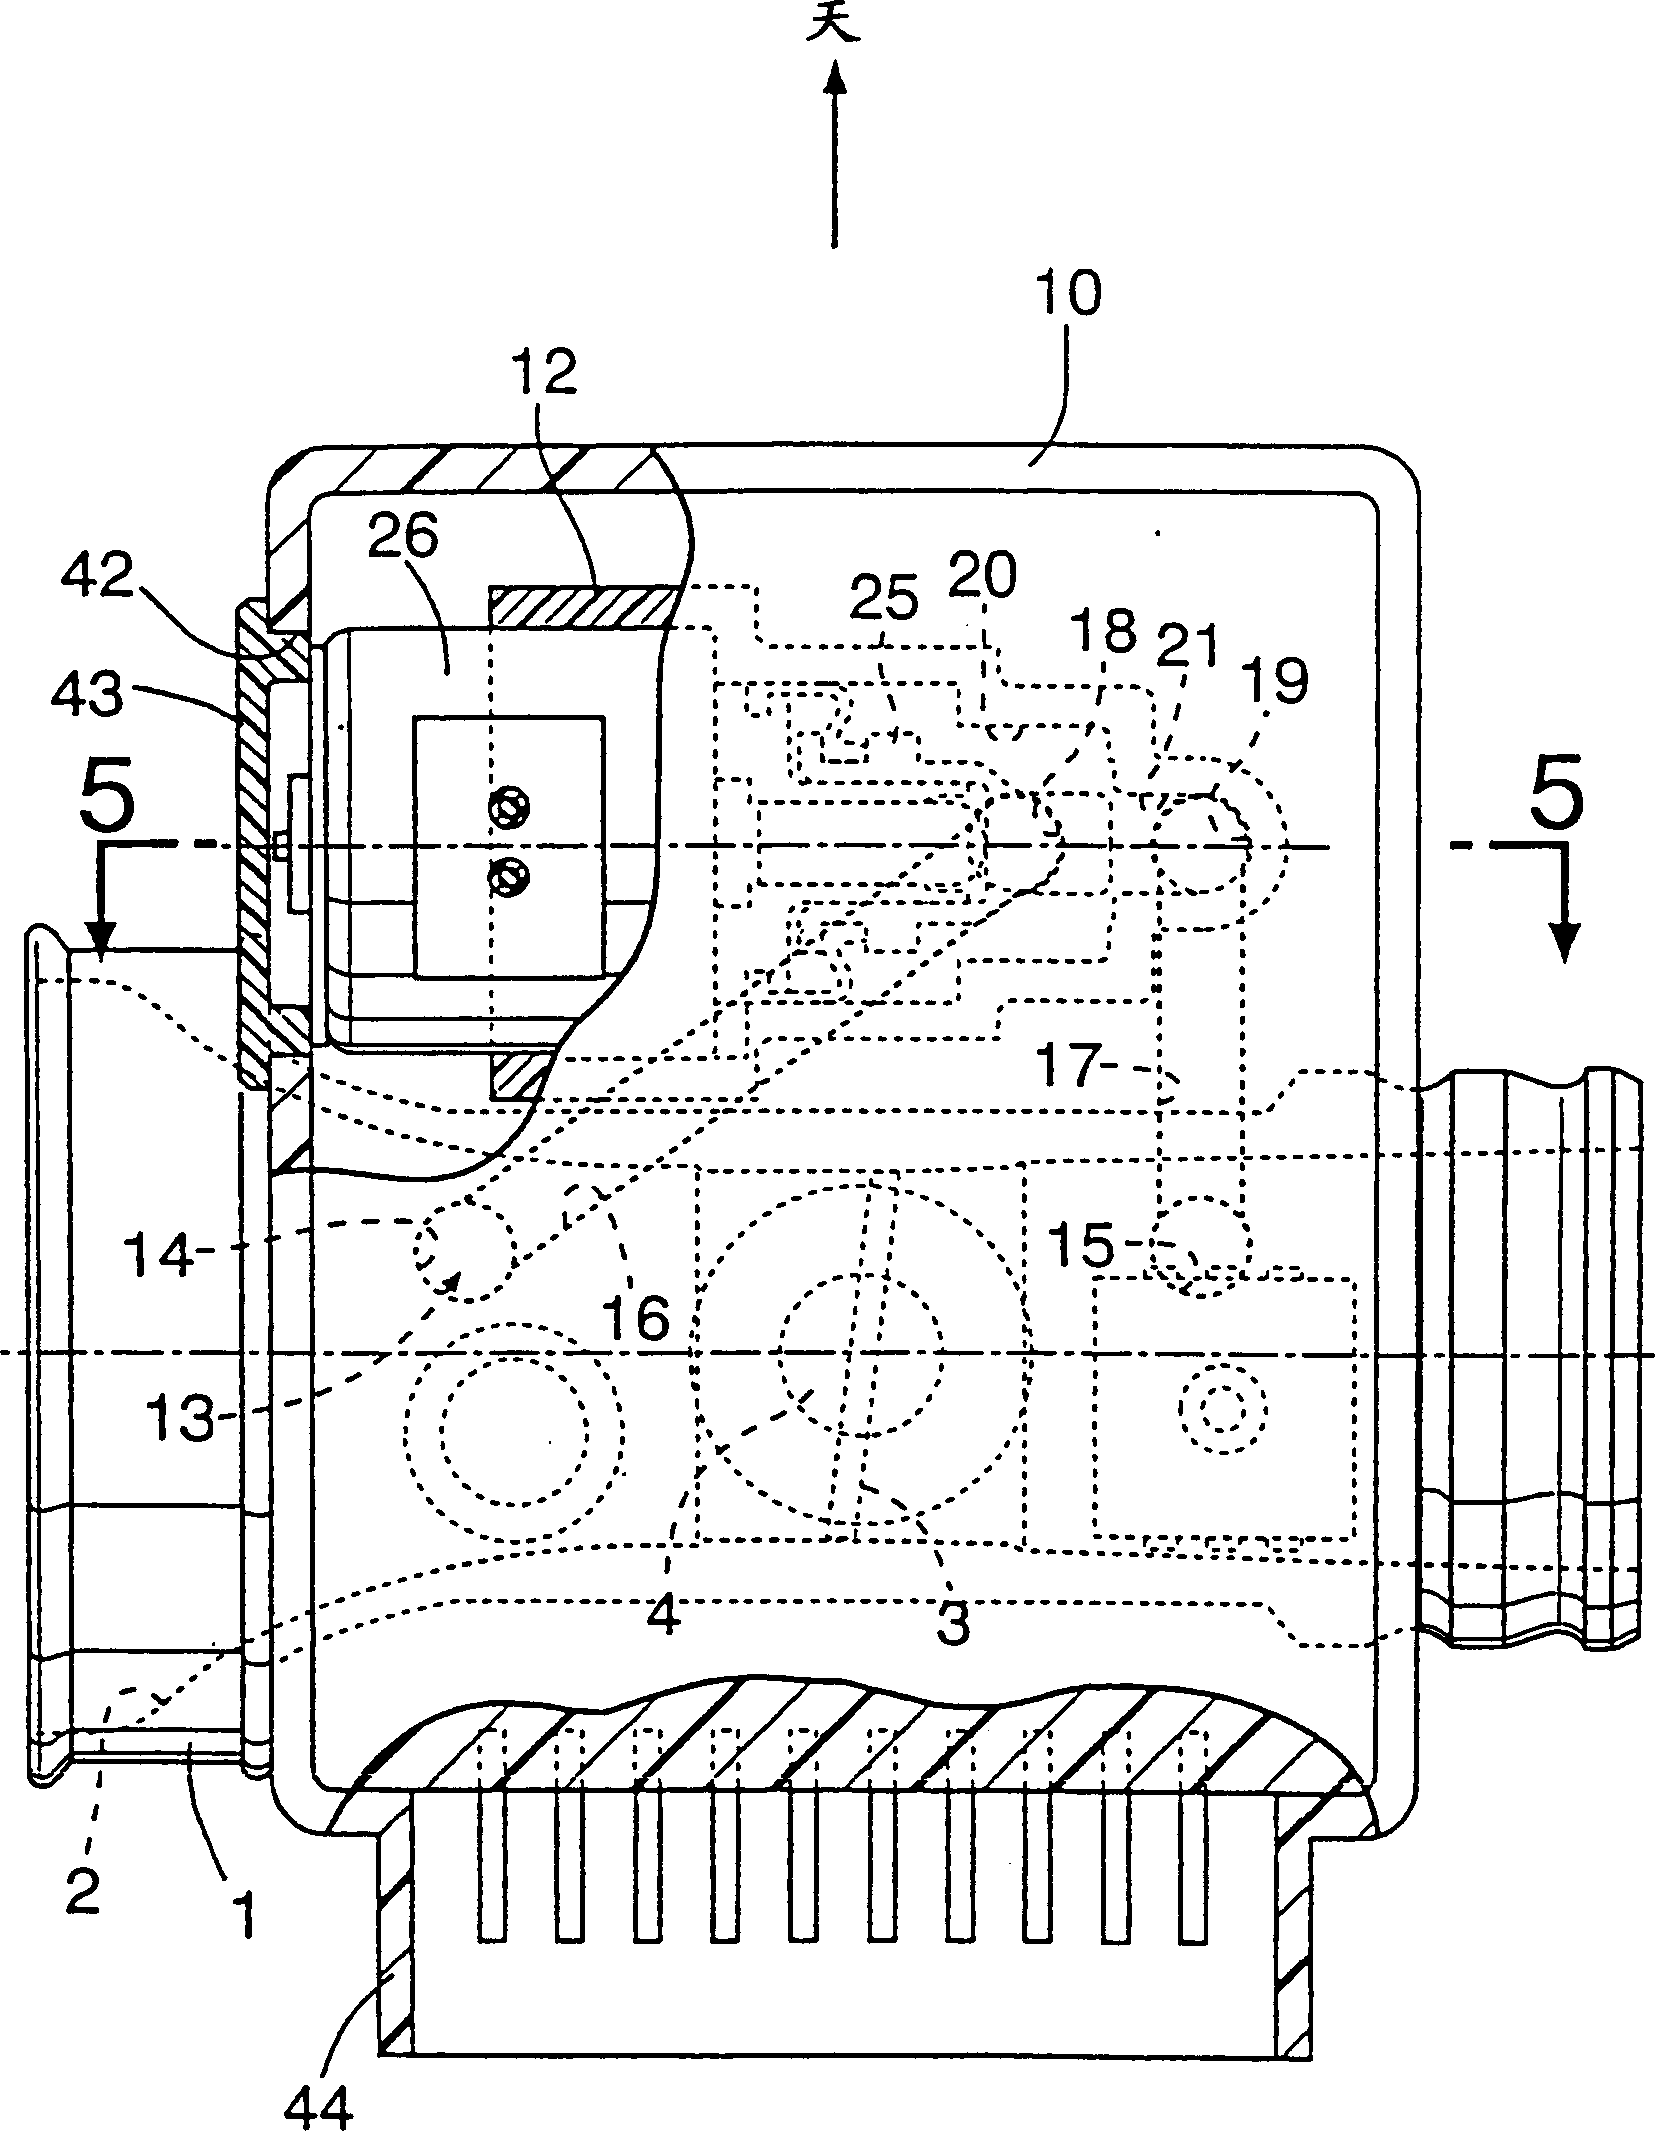 Air suction capacity controller for engine